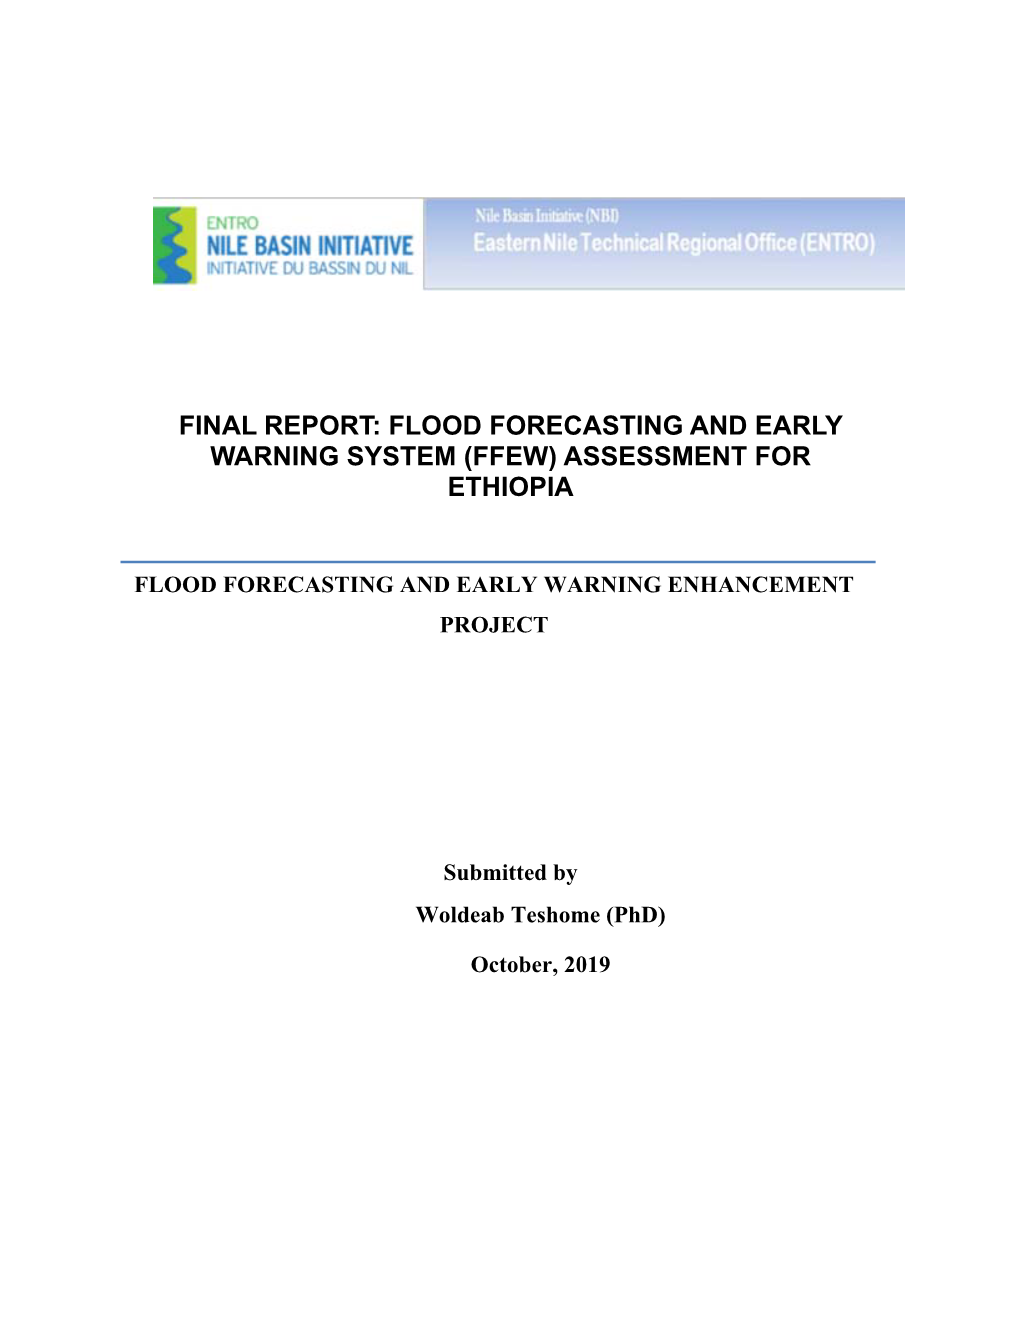 Flood Forecasting and Early Warning System (Ffew) Assessment for Ethiopia